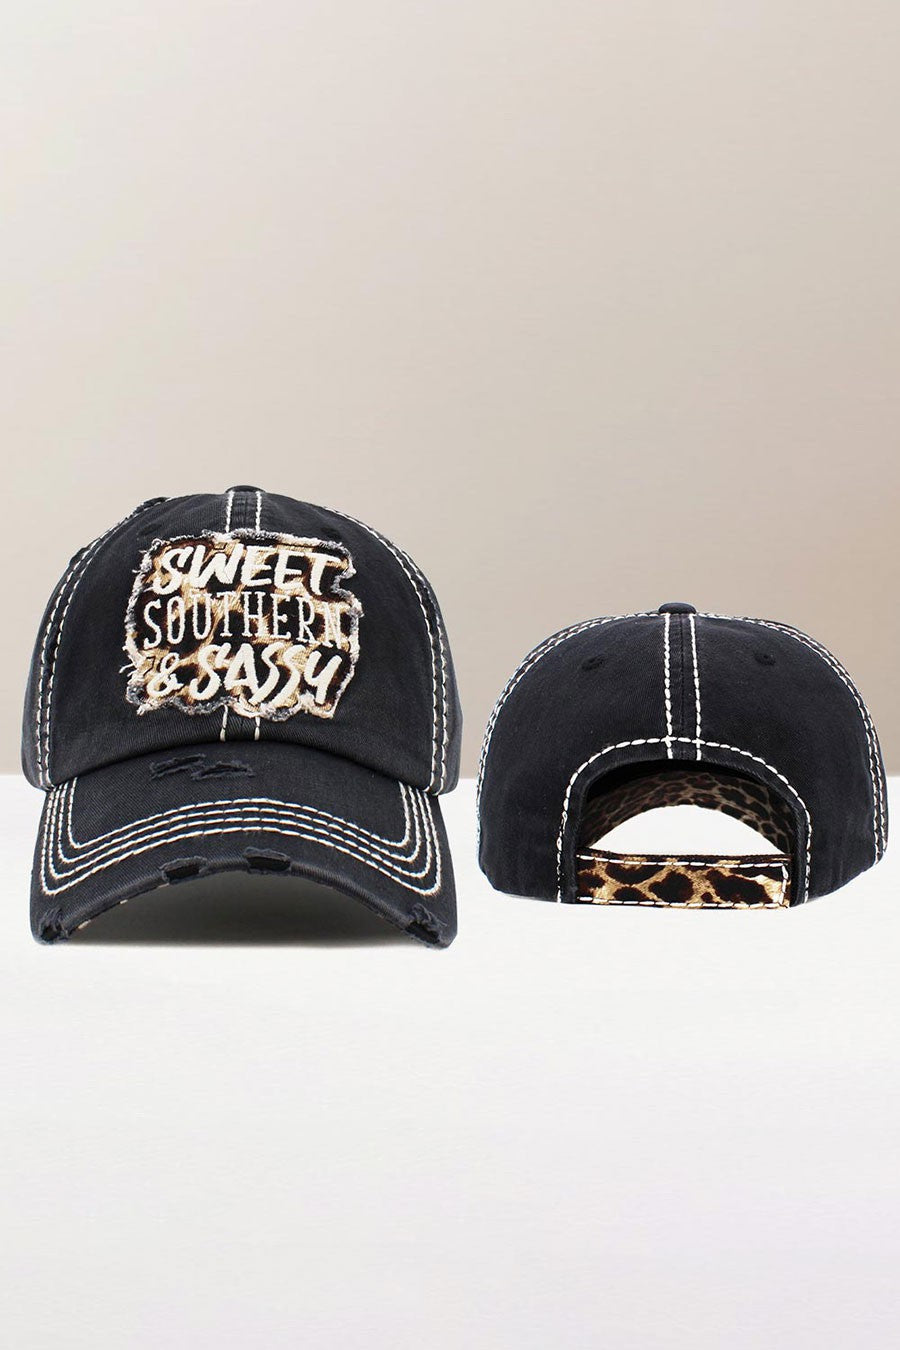 Distress Embroidered Sweet, Southern, and Sassy Vintage Ball Cap in Black